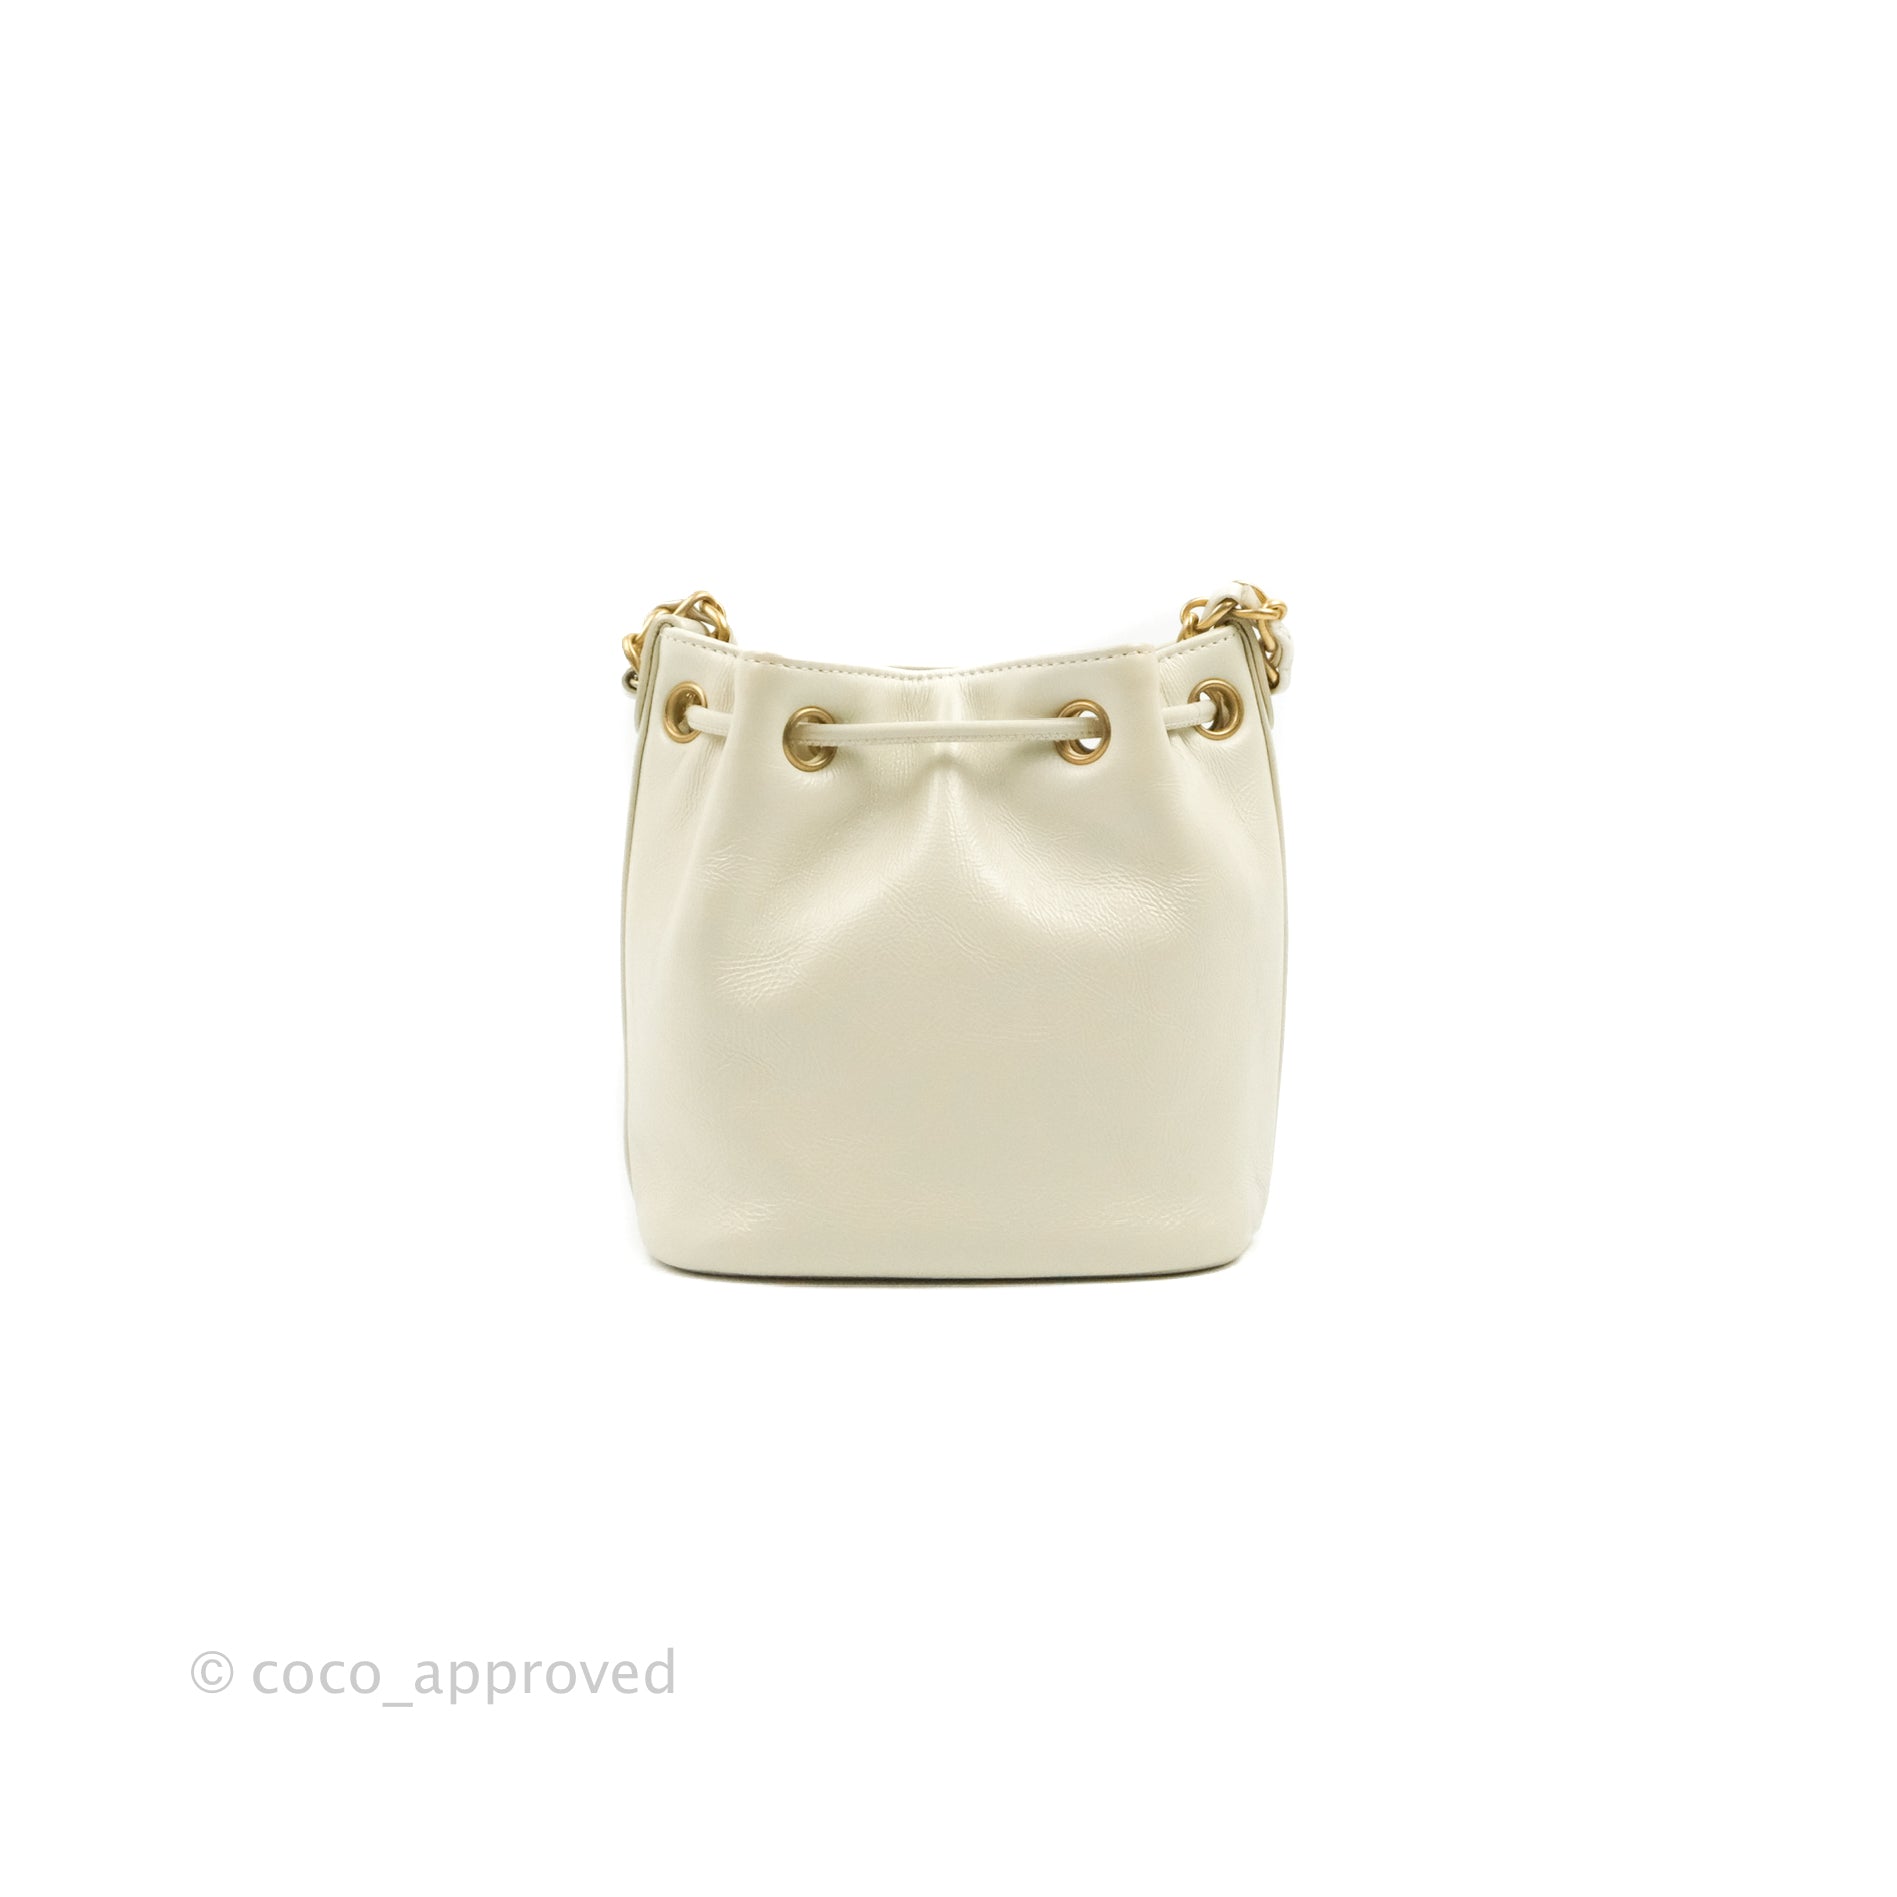 Sold at Auction: A LOUIS VUITTON WHITE TRI-COLOR DRAWSTRING BUCKET BAG